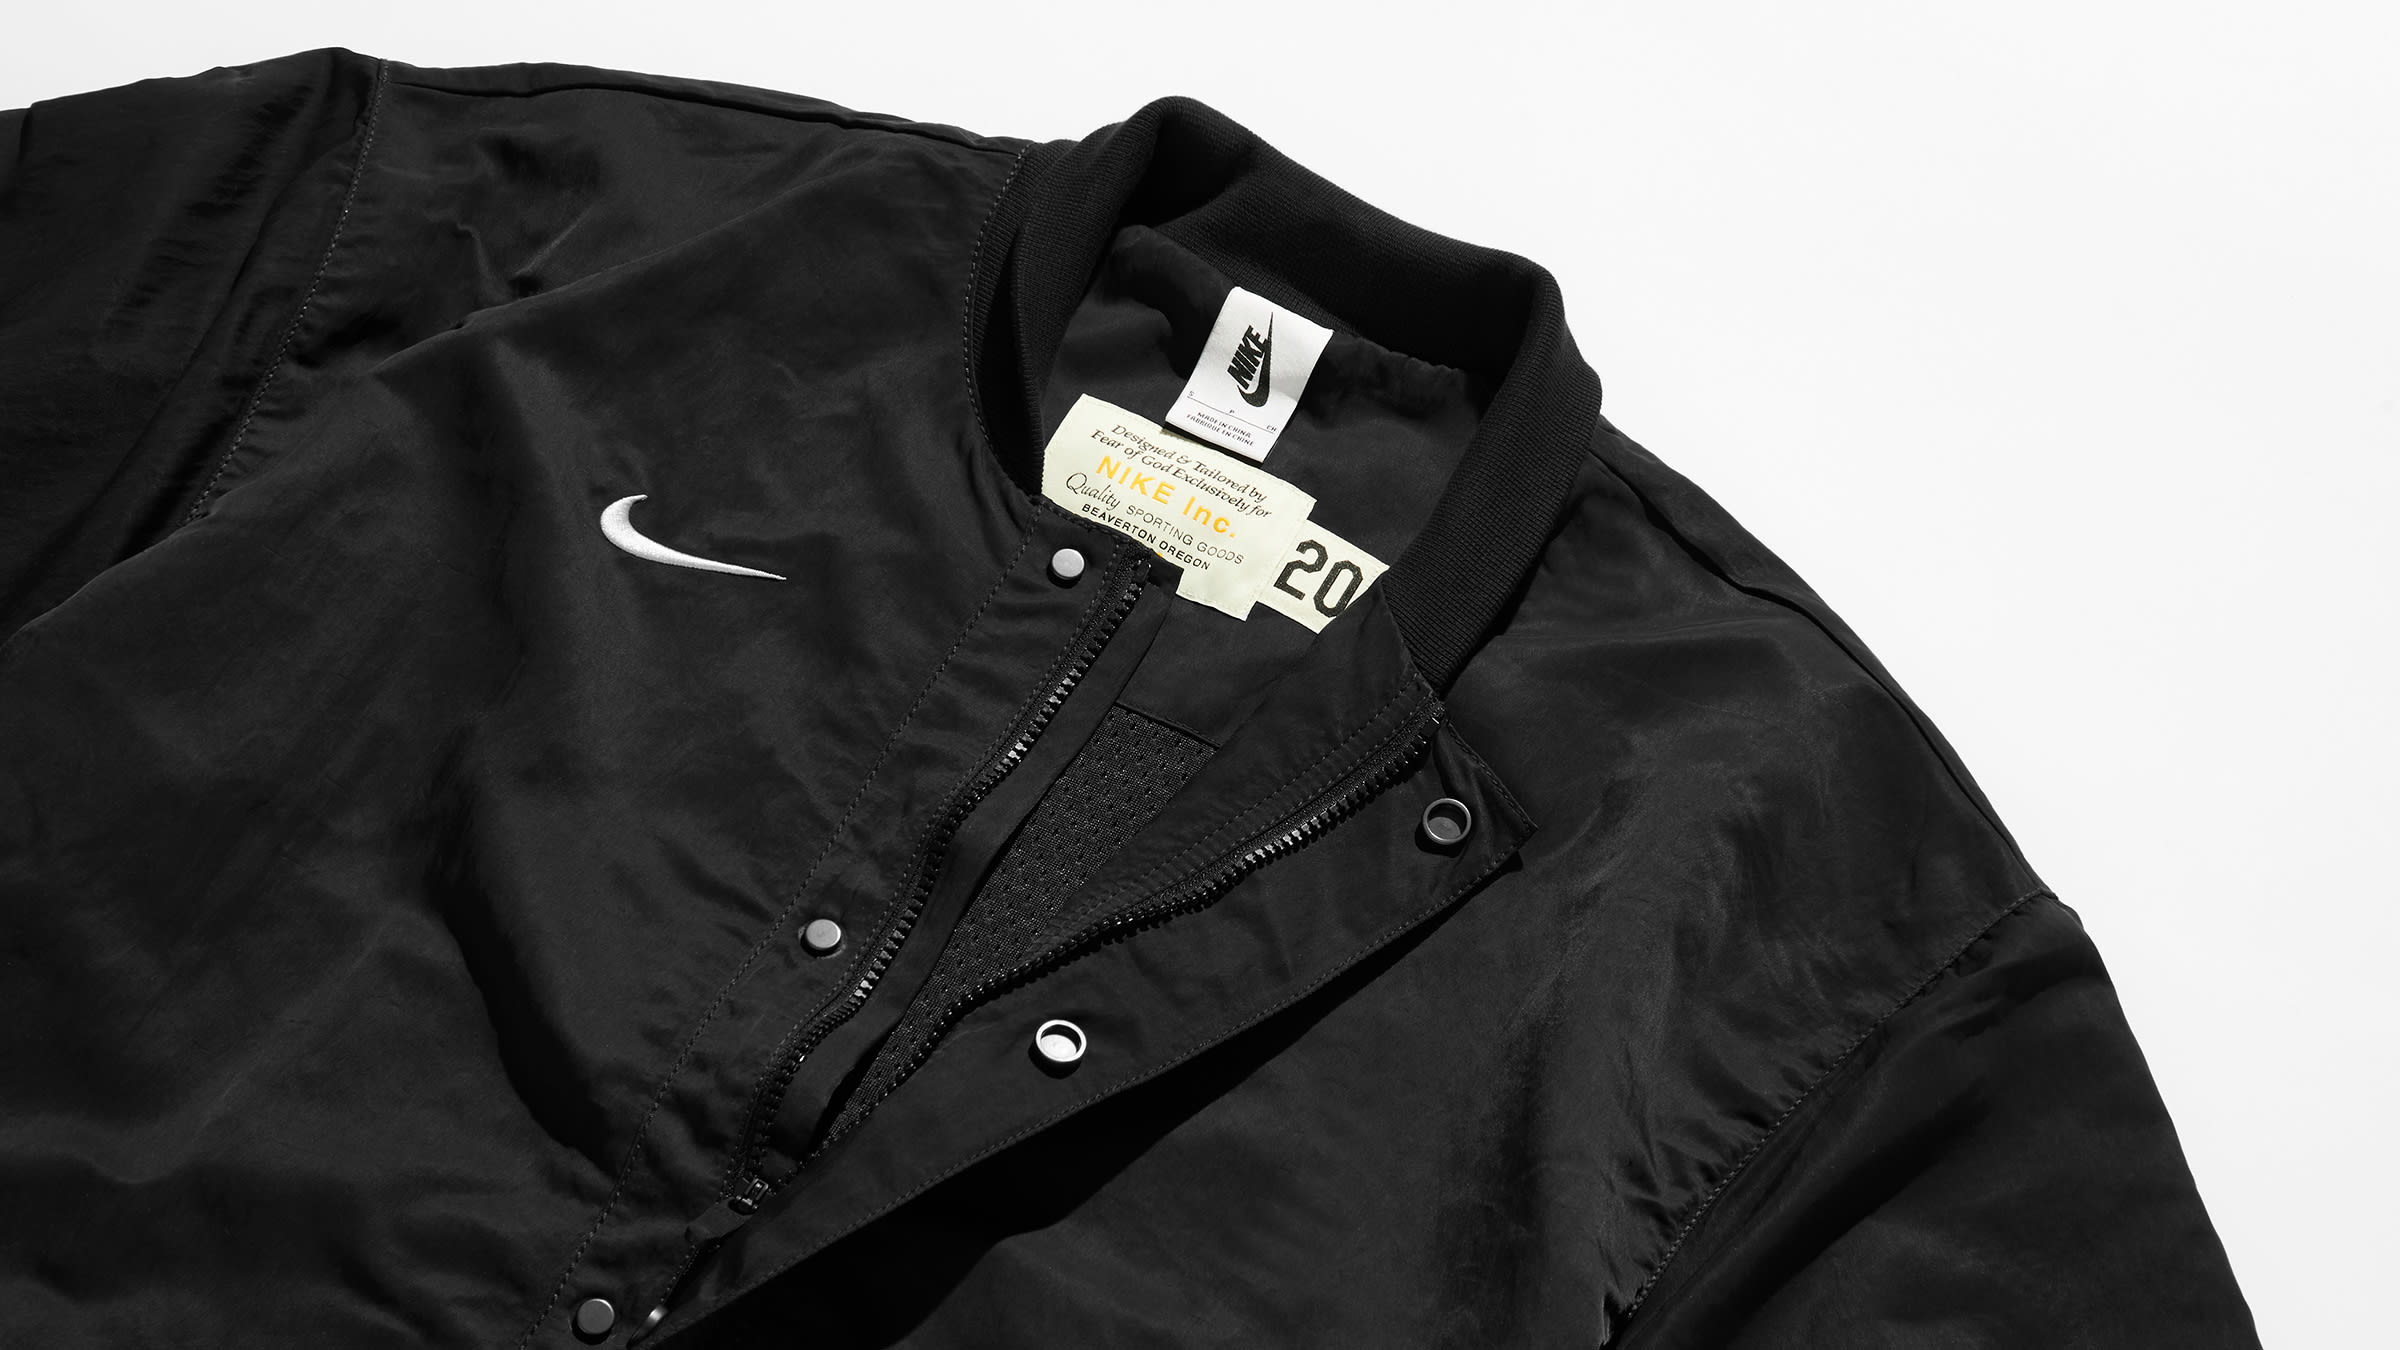 Nike x Jerry Lorenzo Warm Up Top (Off Noir) | END. Launches